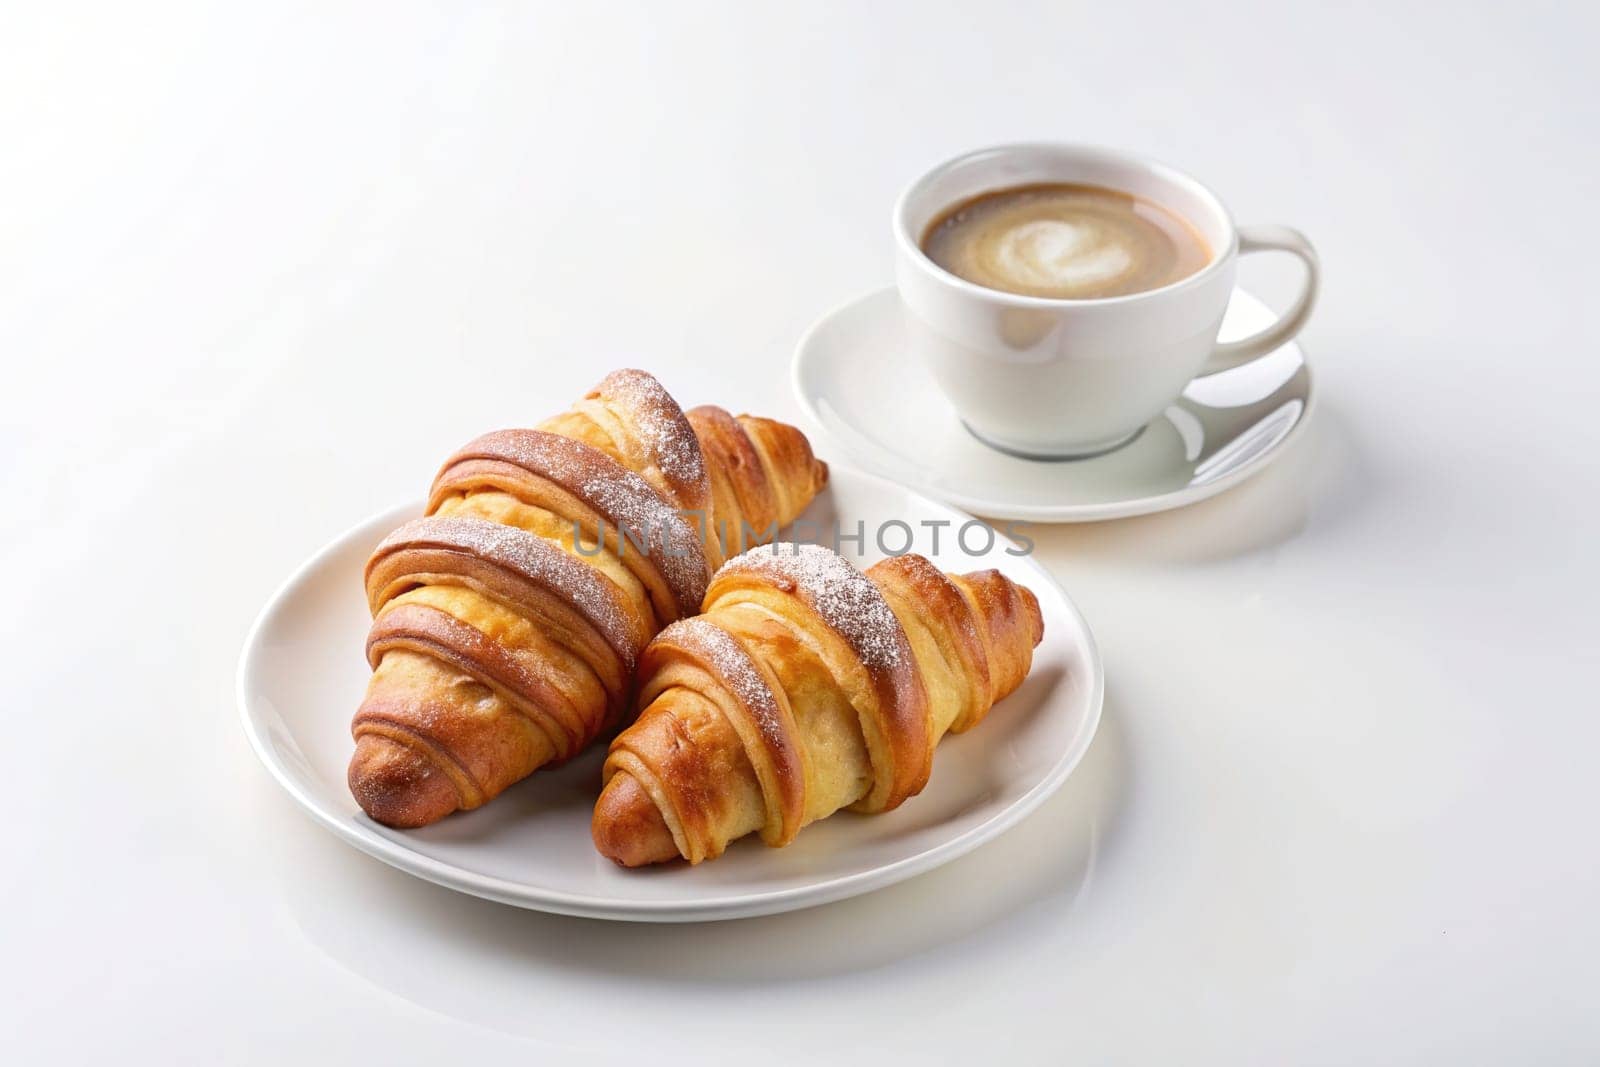 Freshly baked croissants and cup of coffee by yilmazsavaskandag